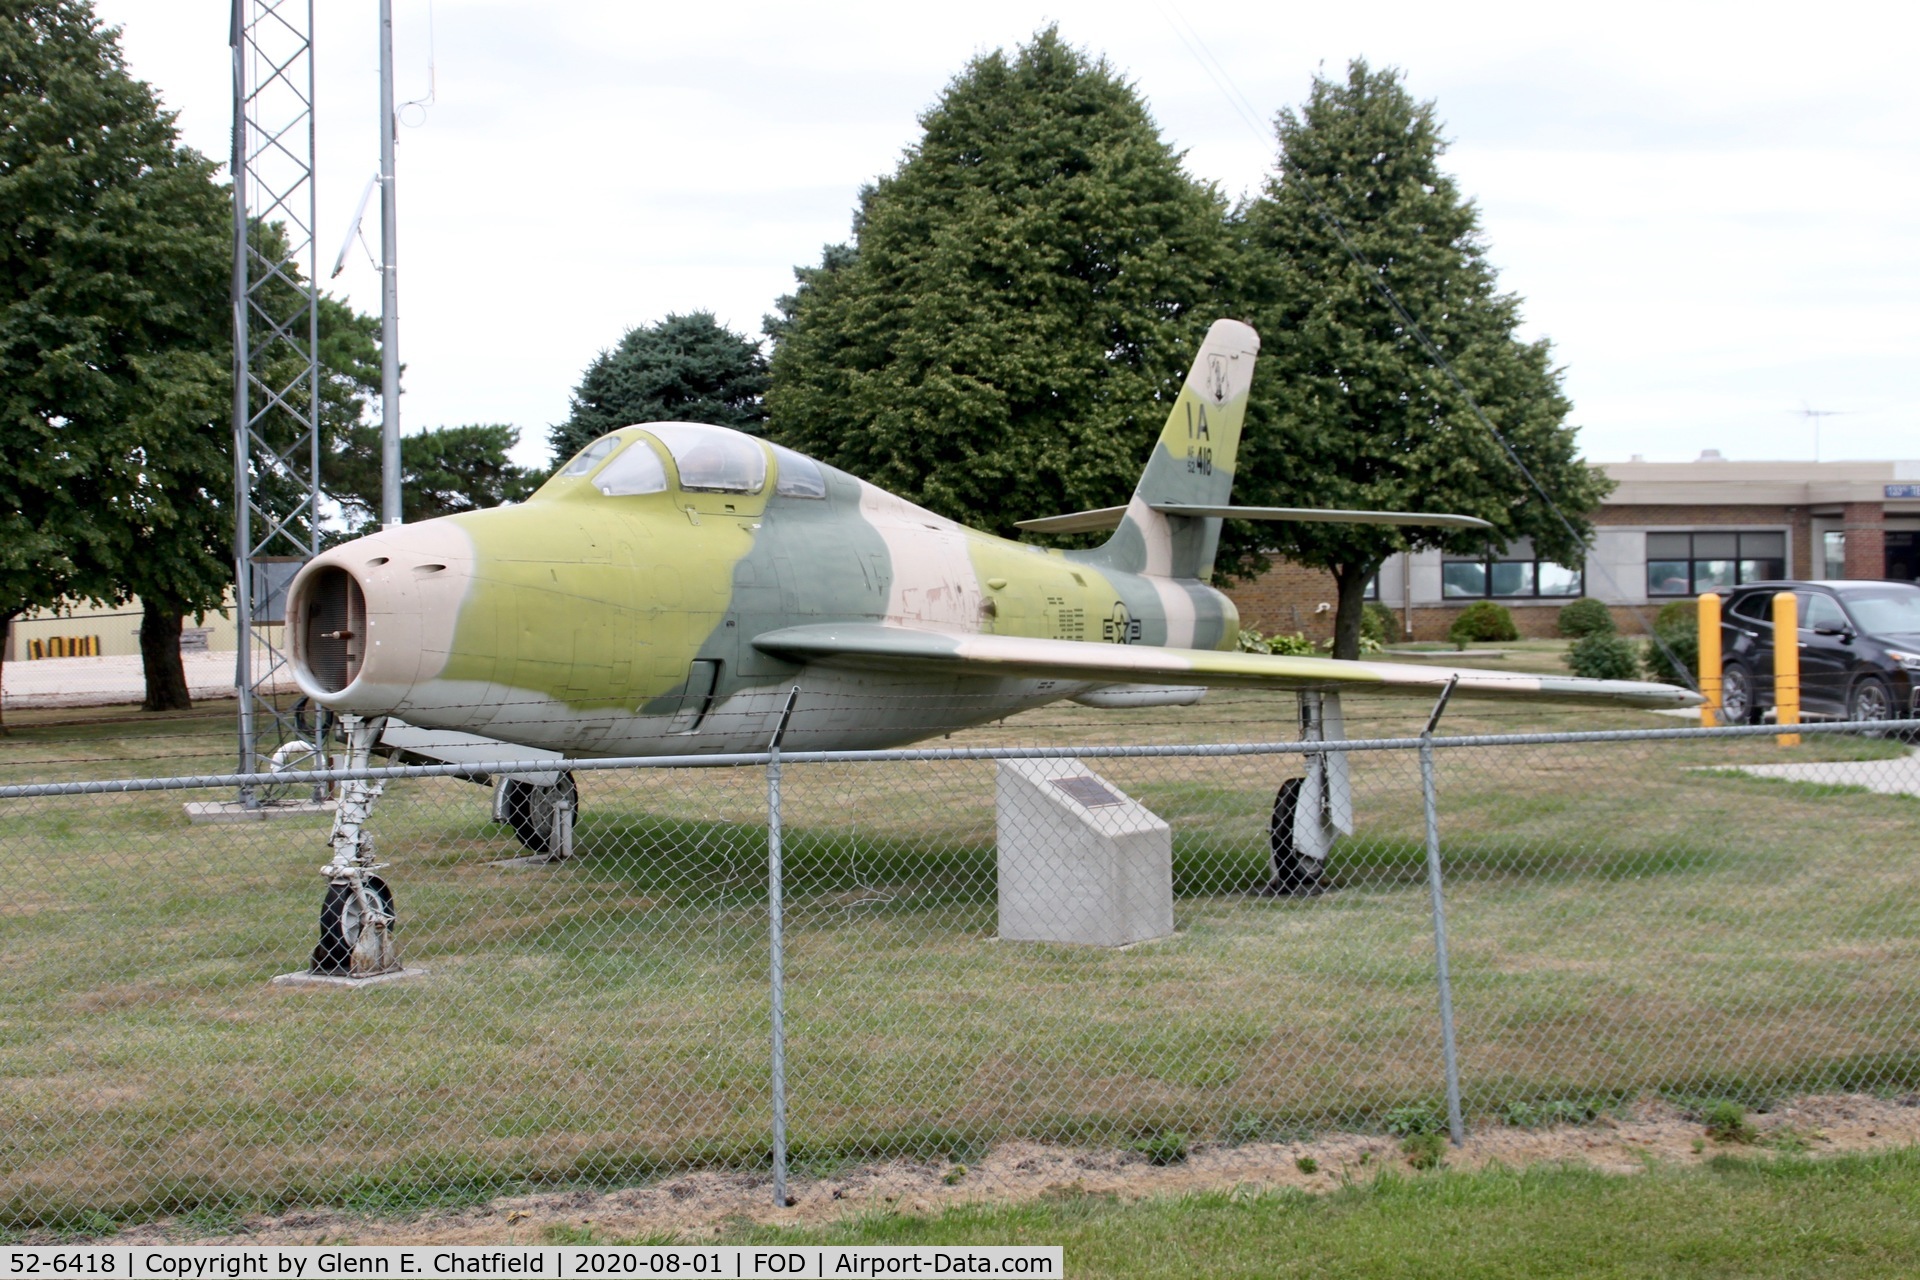 52-6418, 1952 Republic F-84F Thunderstreak C/N Not found 52-6418, Displayed in front of the ANG base